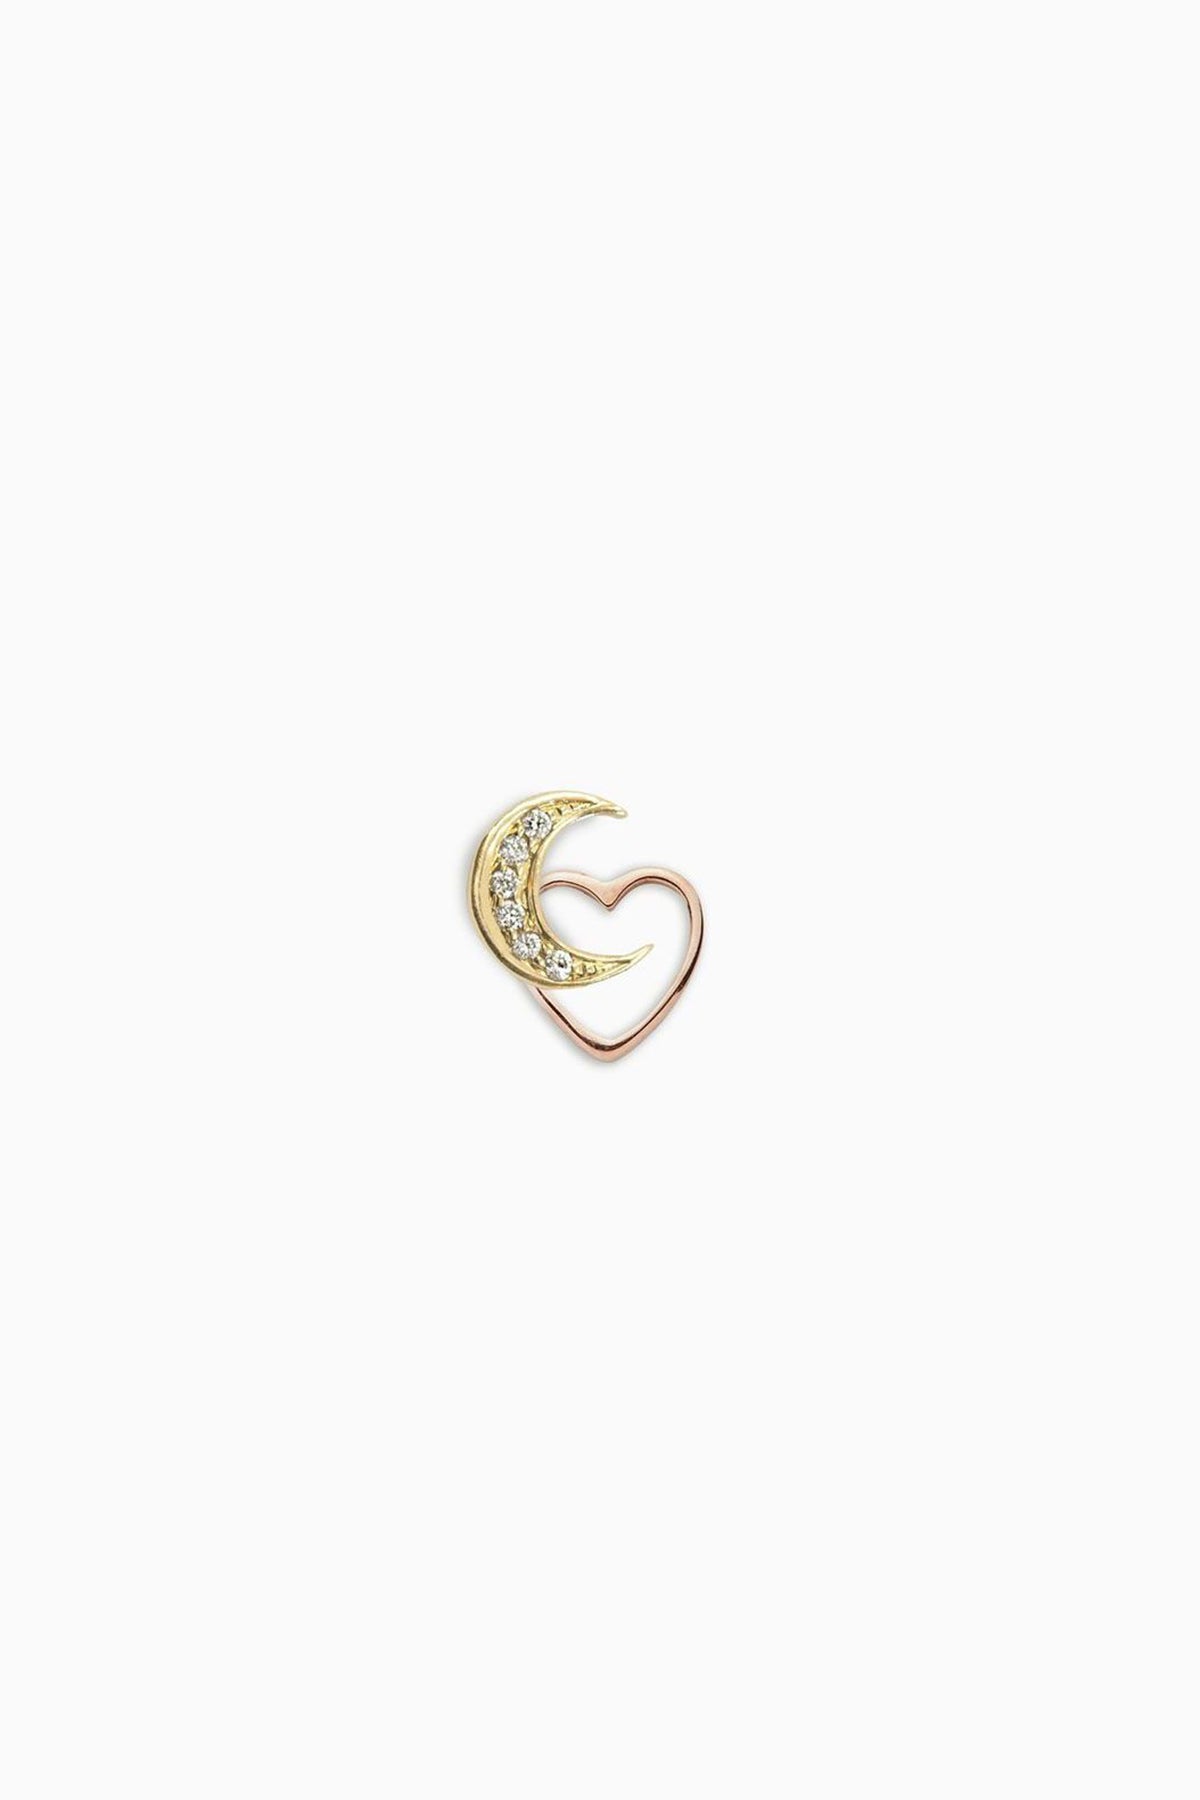 LOQUET LONDON | LOVE YOU TO MOON CHARM